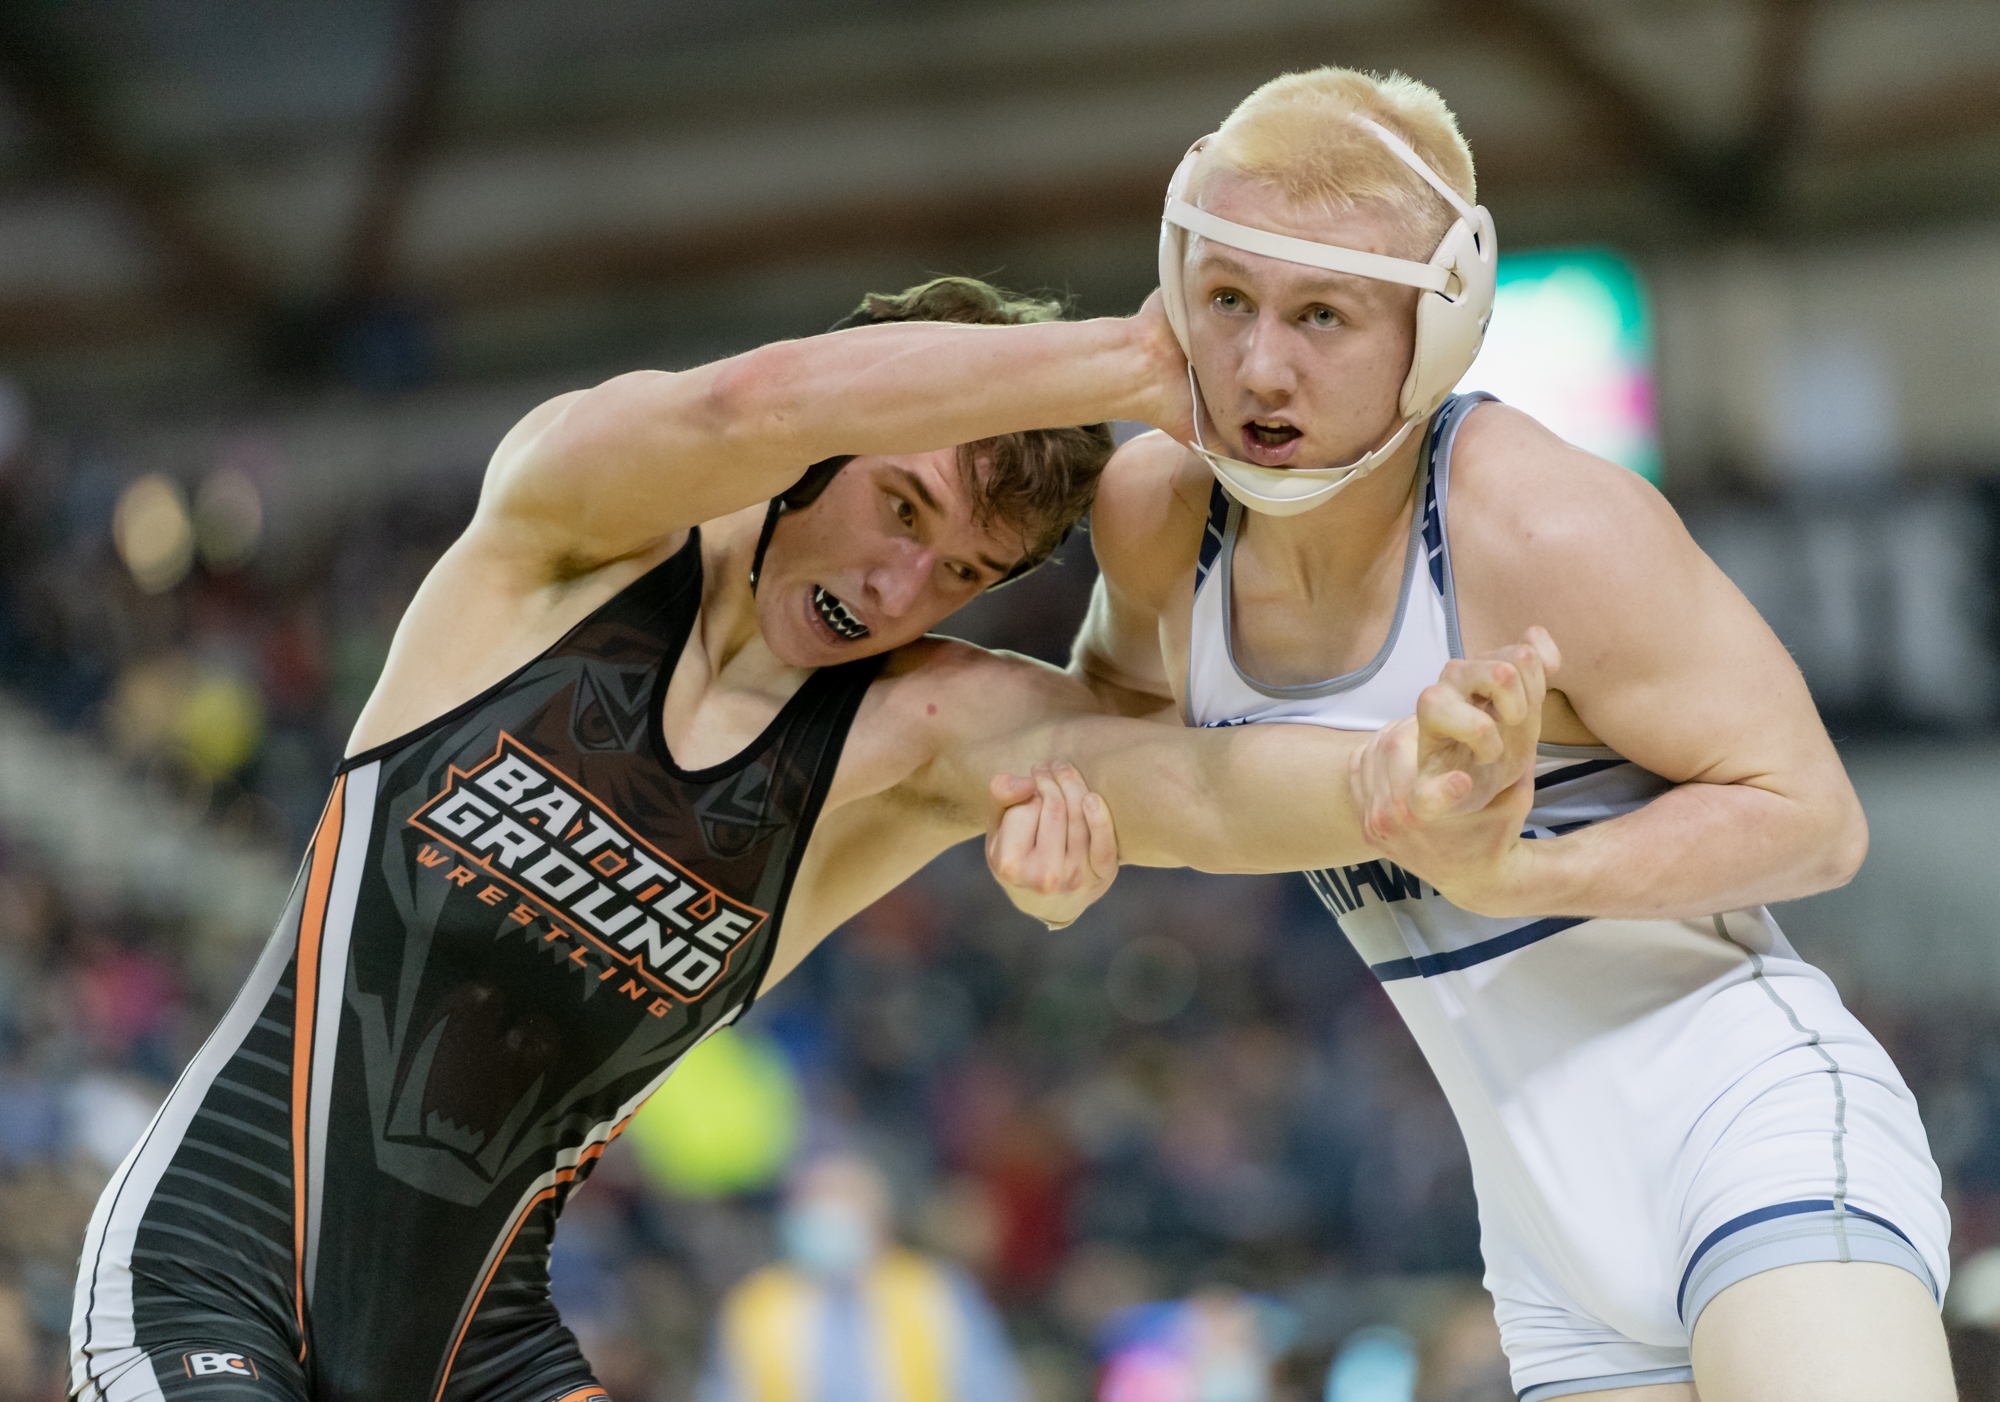 Toppenish boys roll to 4th straight wrestling state title, Zuniga